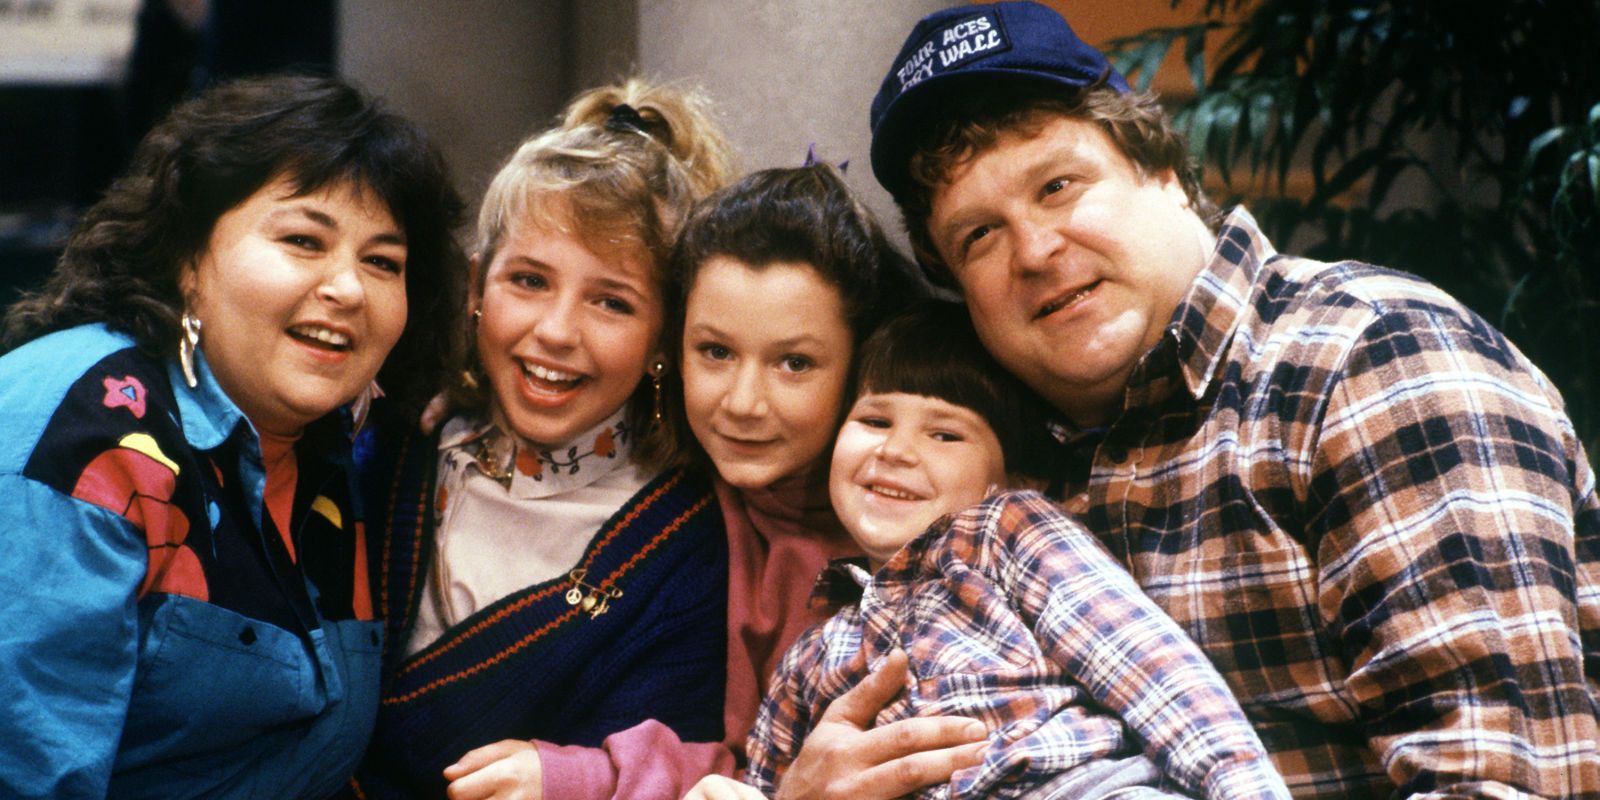 John Goodman and the cast of Roseanne